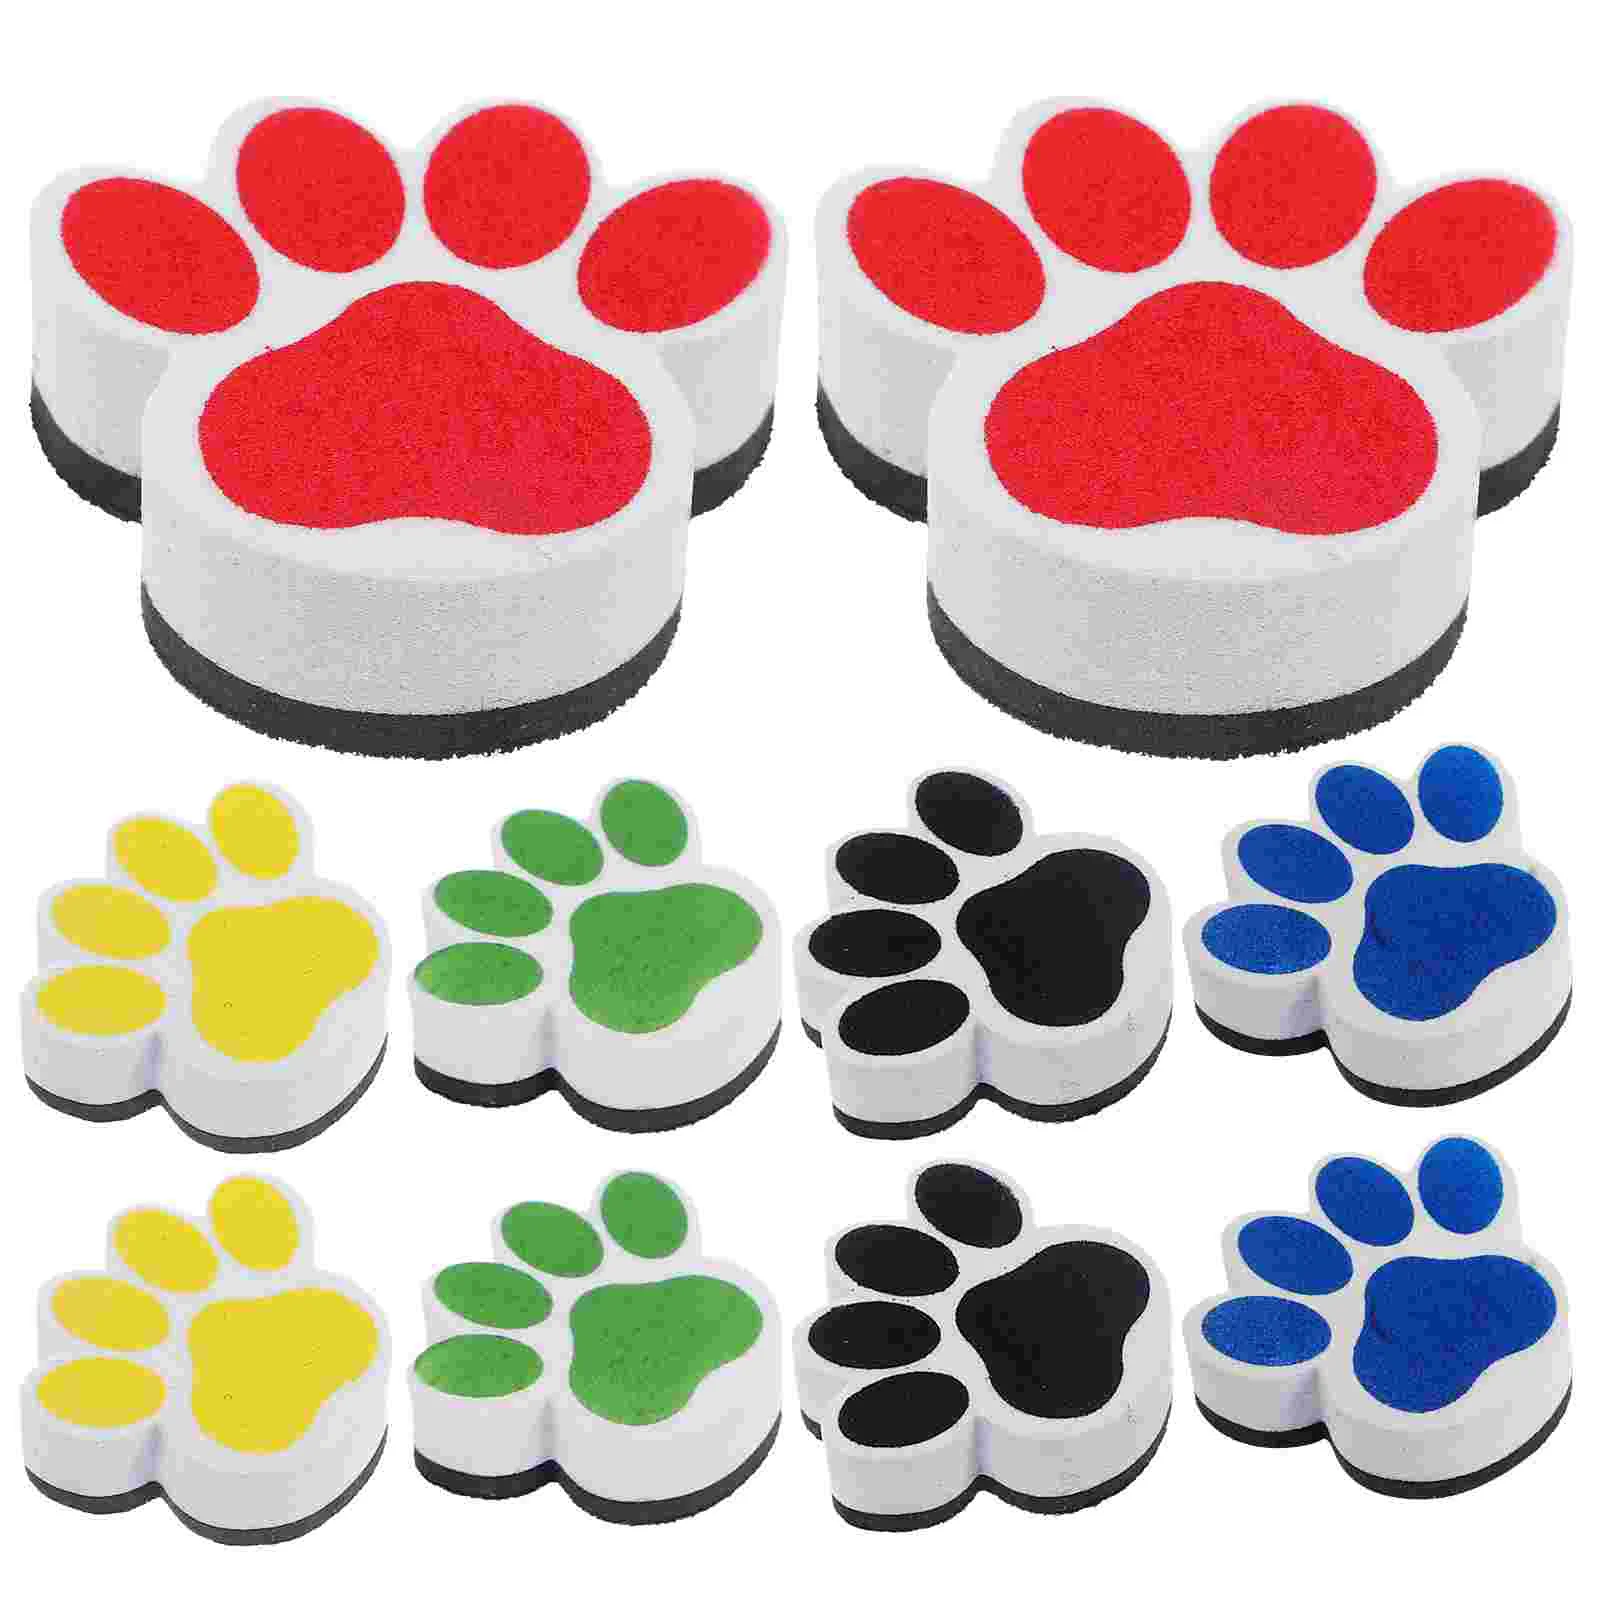 

Magnetic White Board Erasers 10Pcs Paw Print Dry Erase Eraser Chalkboard Cleaner Cartoon Whiteboard Erasers Classroom